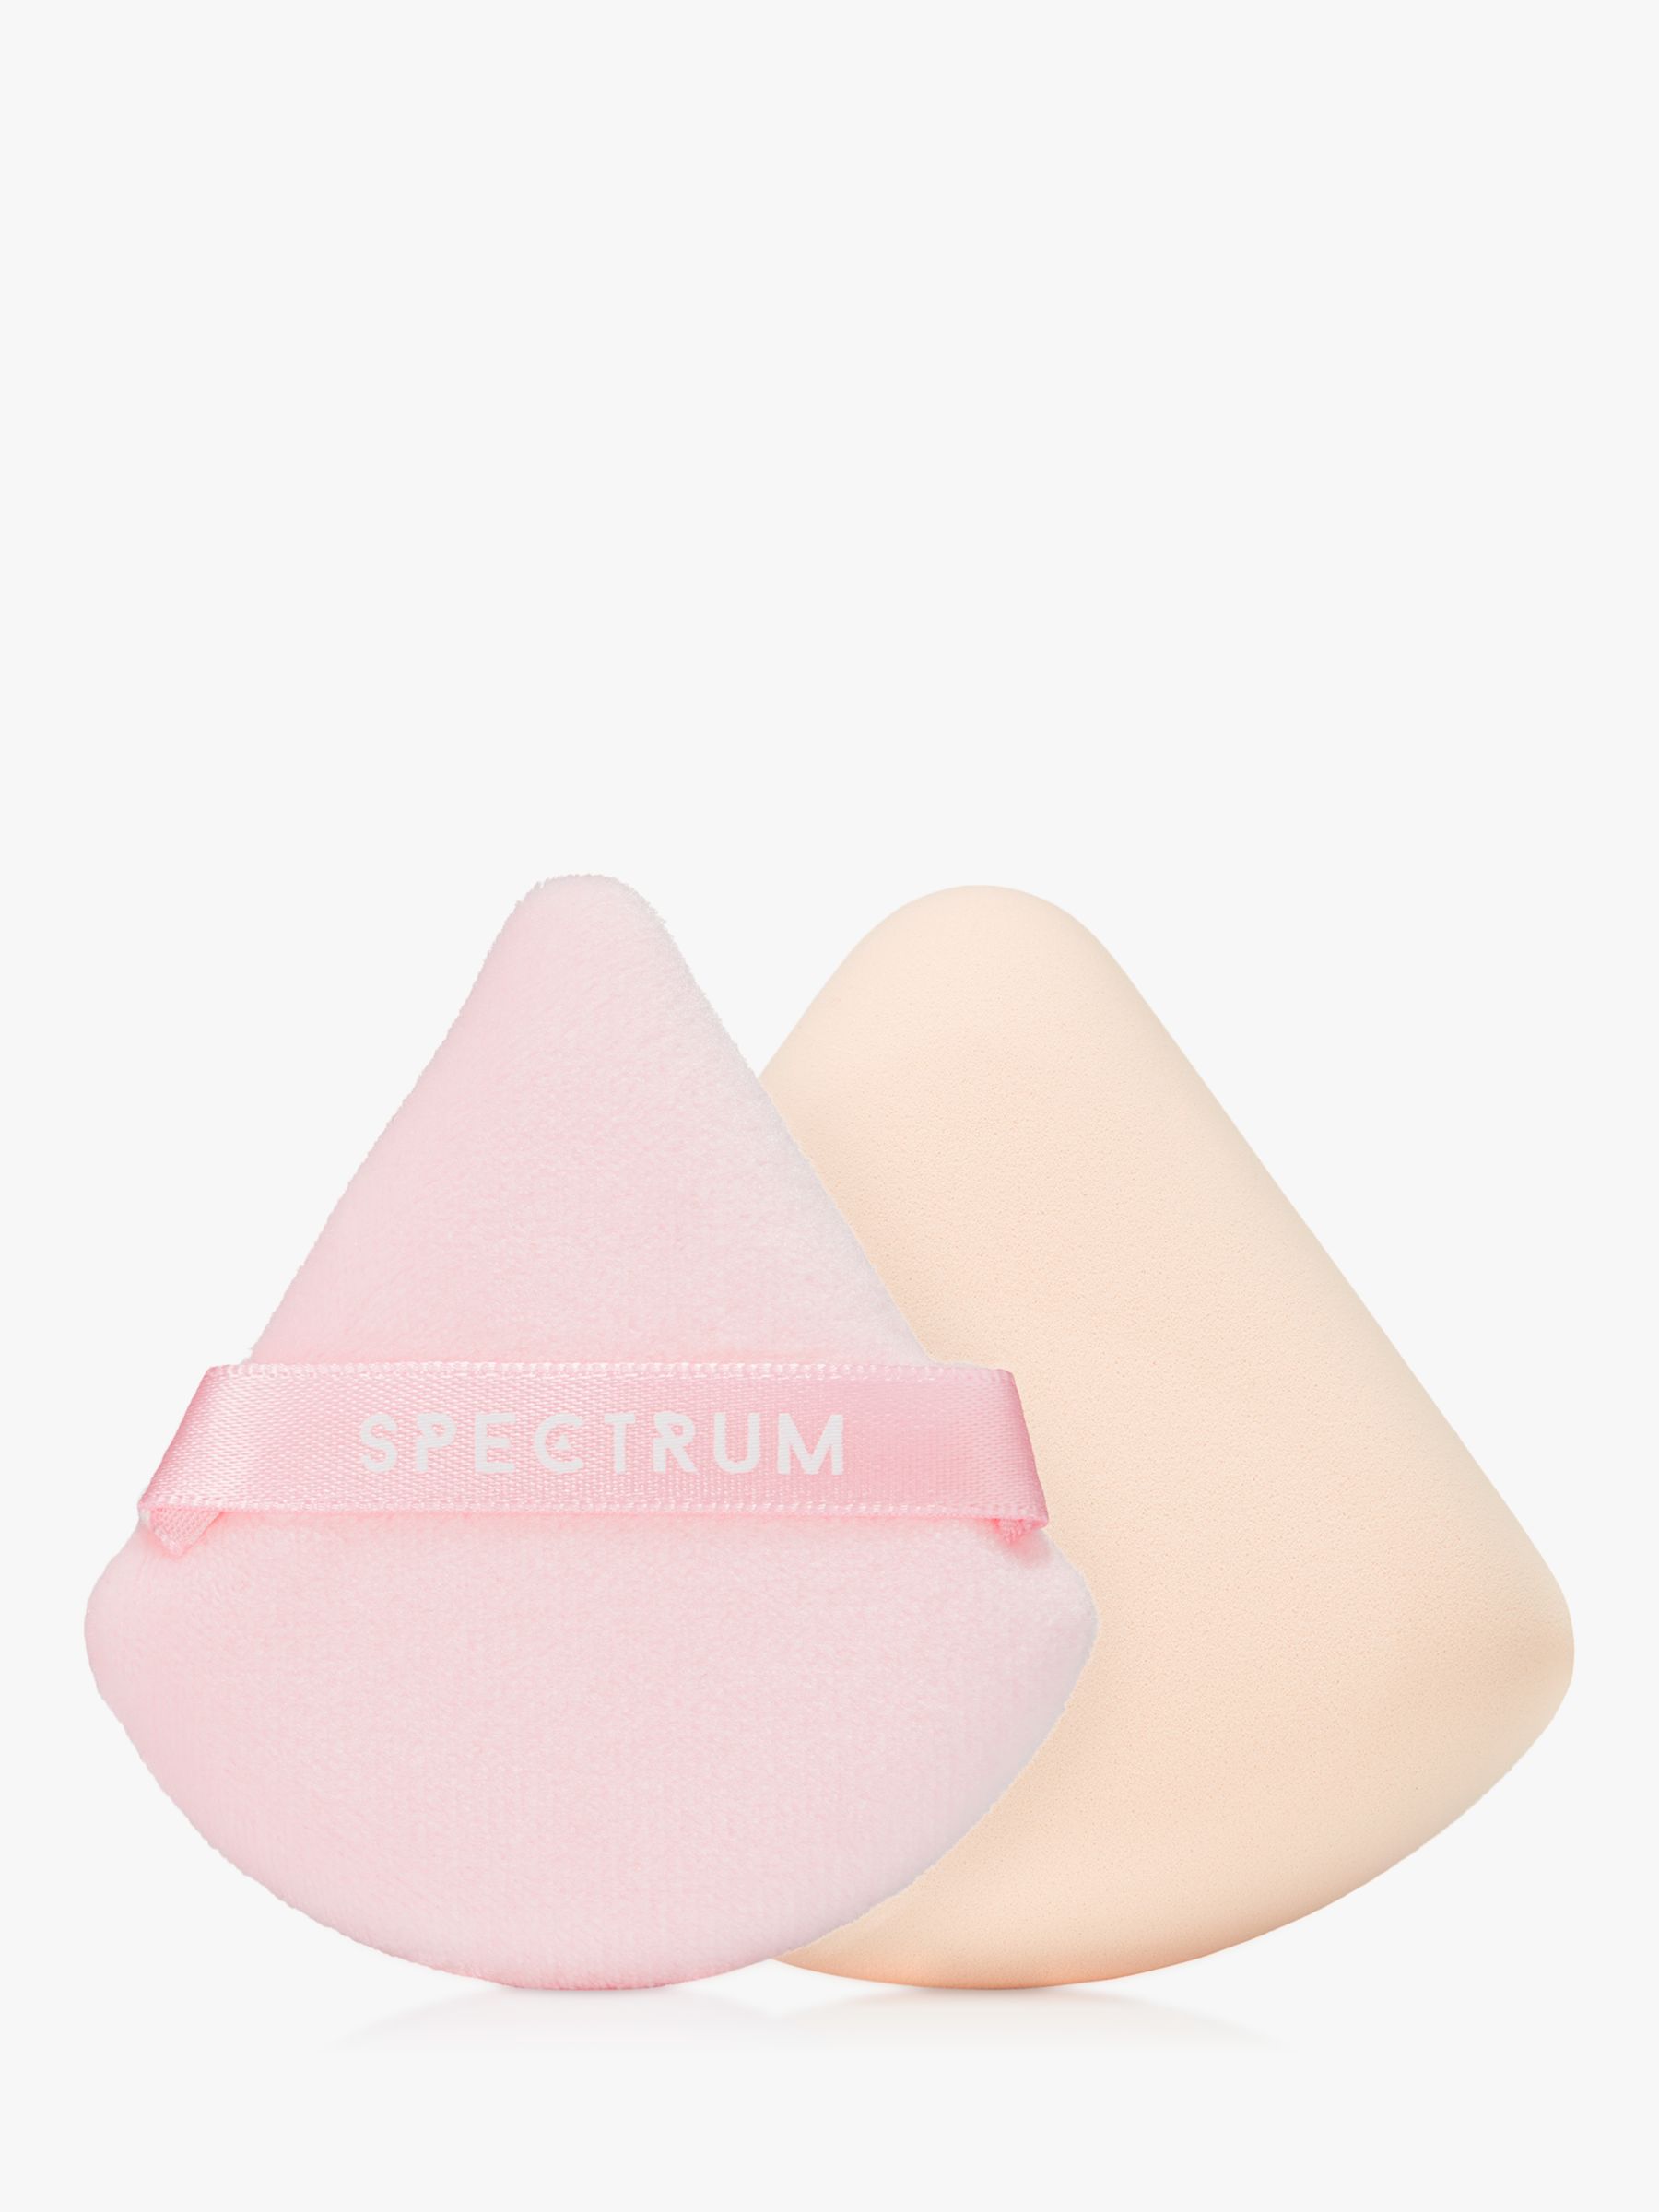 Spectrum Pink Velour and Marble Rubycell Puff Duo, Multi 1